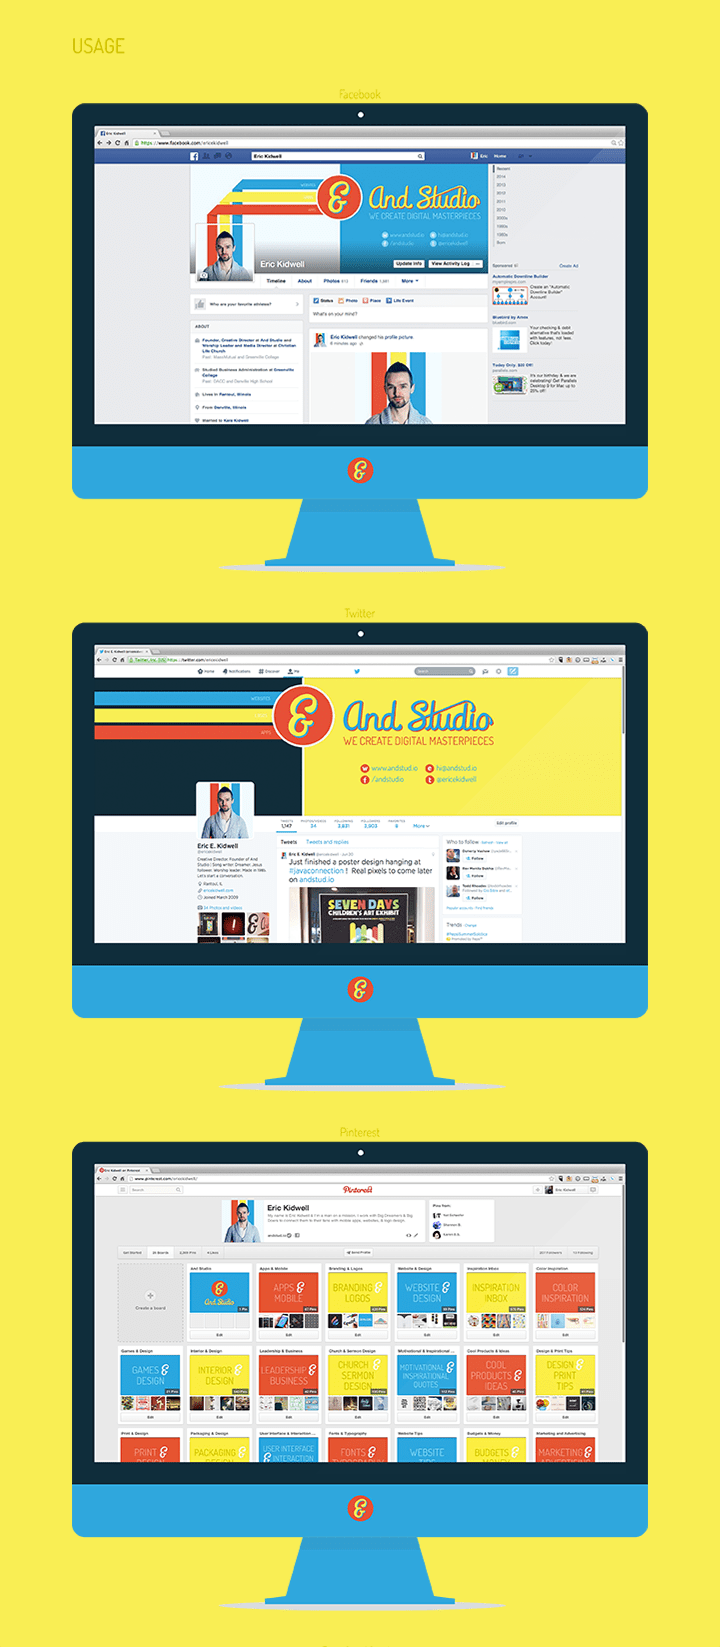 Brand Style Guide - And Studio - Usage - Social